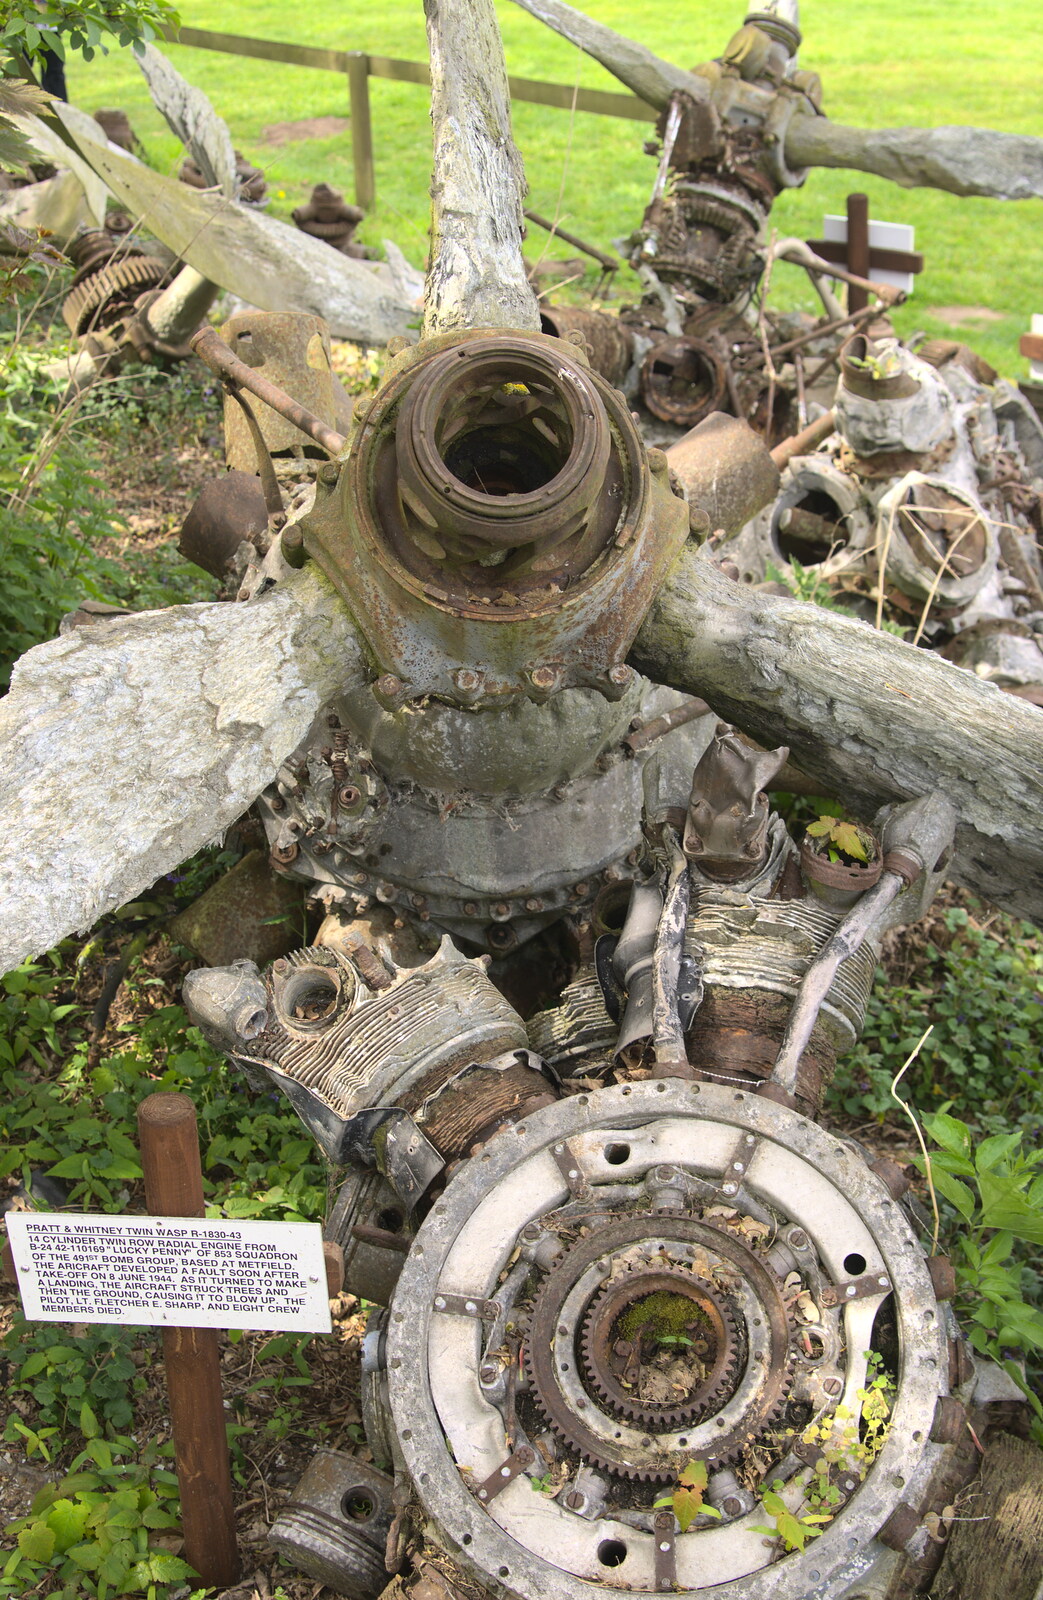 There's a collection of wrecked propellors from Norfolk and Suffolk Aviation Museum, Flixton, Suffolk - 30th April 2017